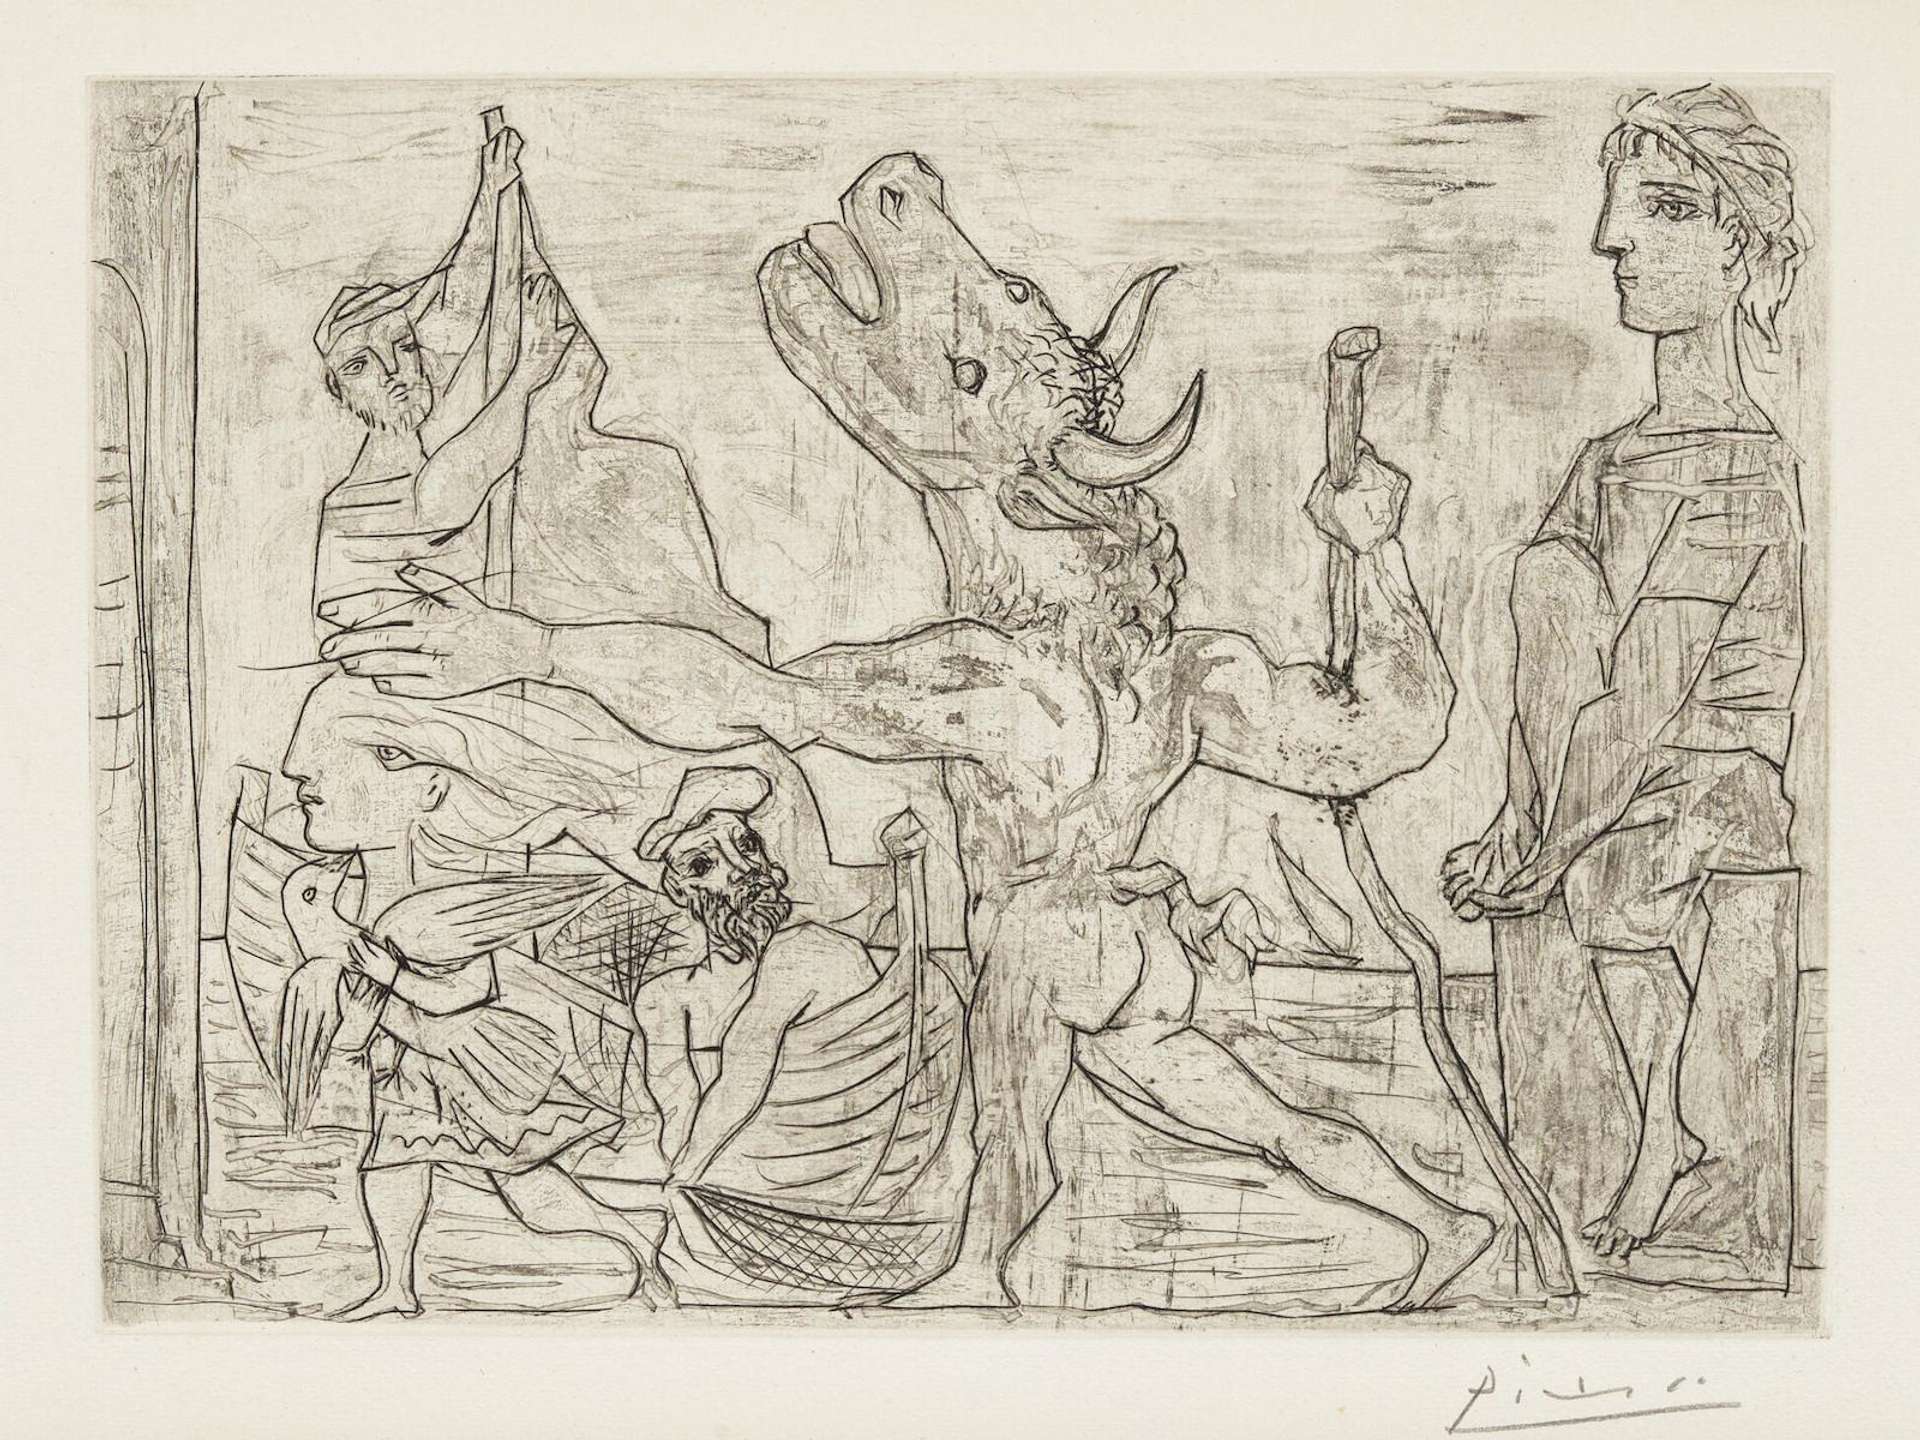 This print shows a large Minotaur being guided by a young girl towards the left side of the composition.